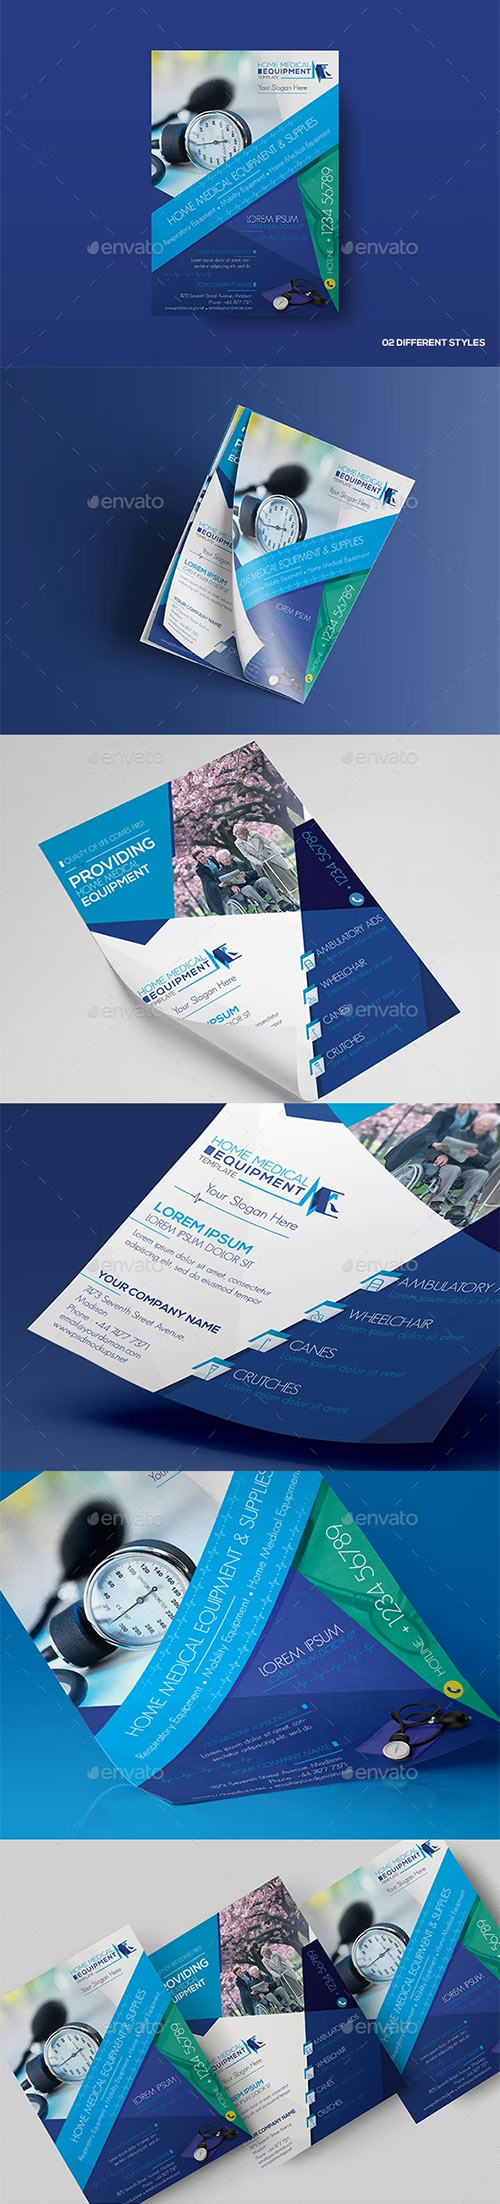 Home Medical Equipment/ Flyer Template 16895879